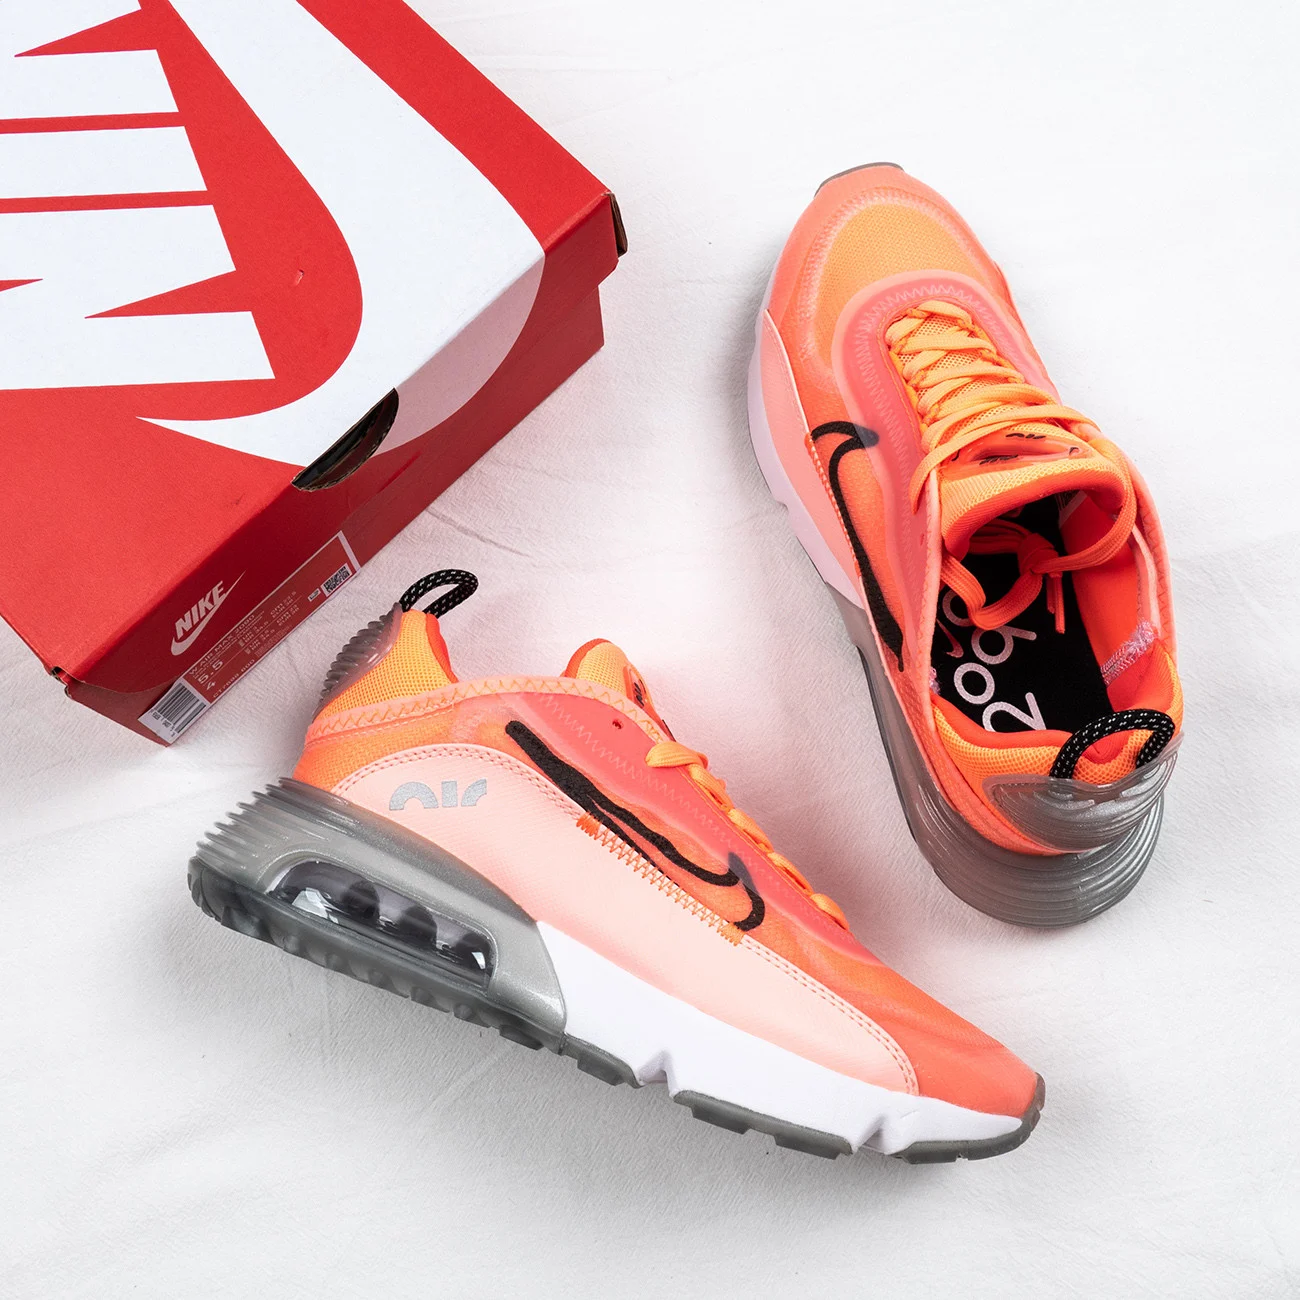 Nike Air Max 2090 Lava Glow CT7698-600 On Sale